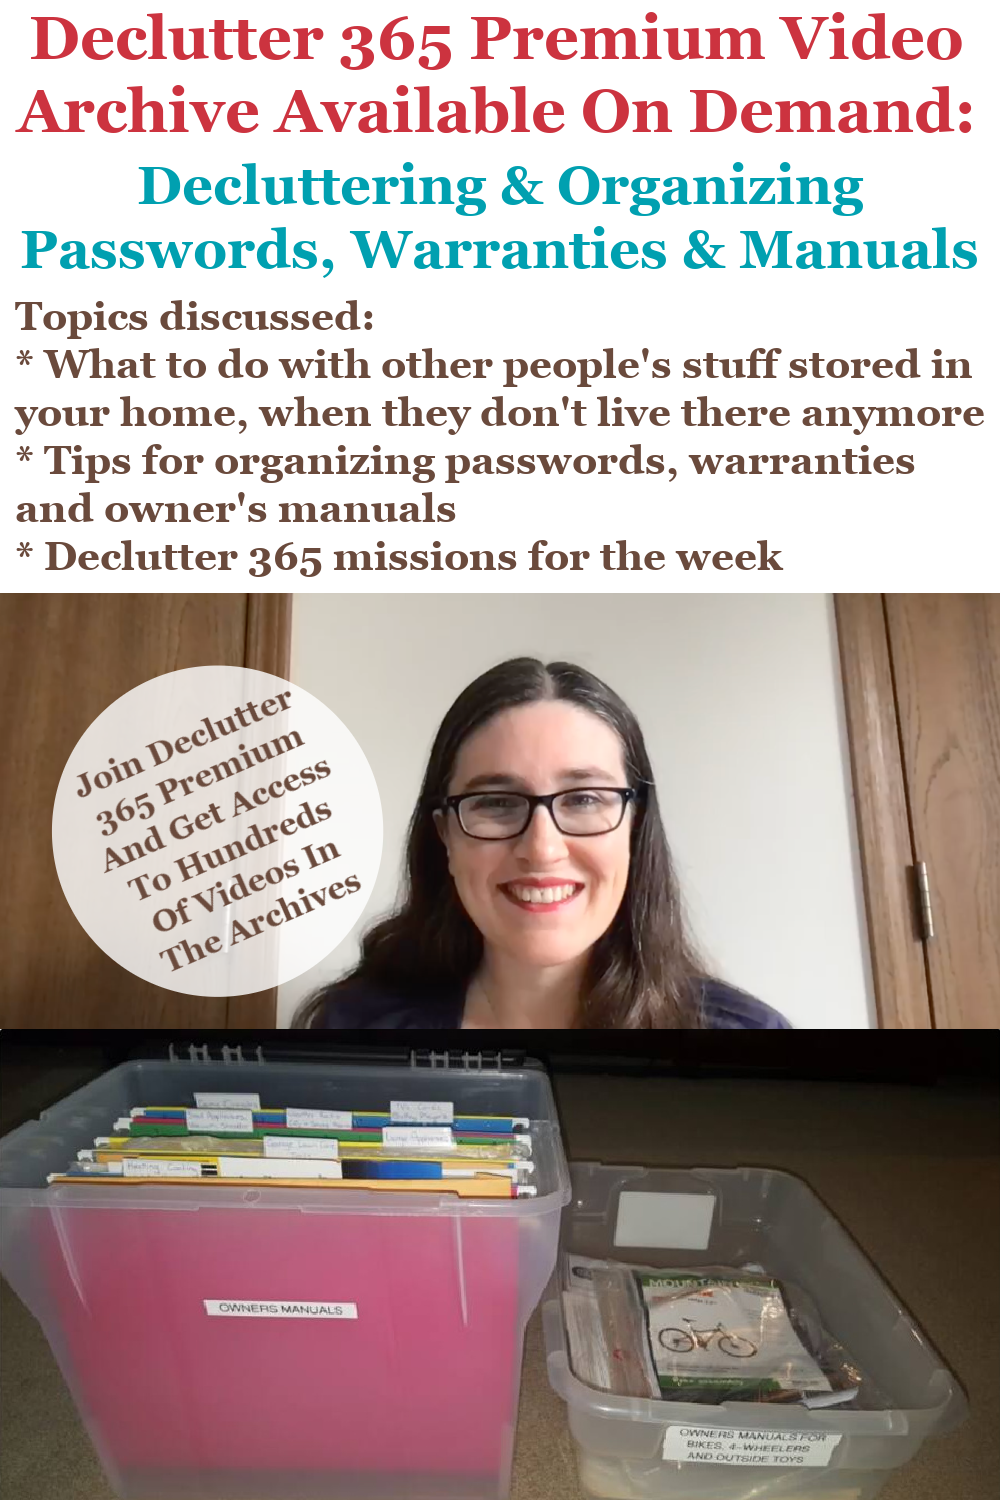 Declutter 365 Premium video archive available on demand all about decluttering and organizing passwords, manuals and warranties, on Home Storage Solutions 101